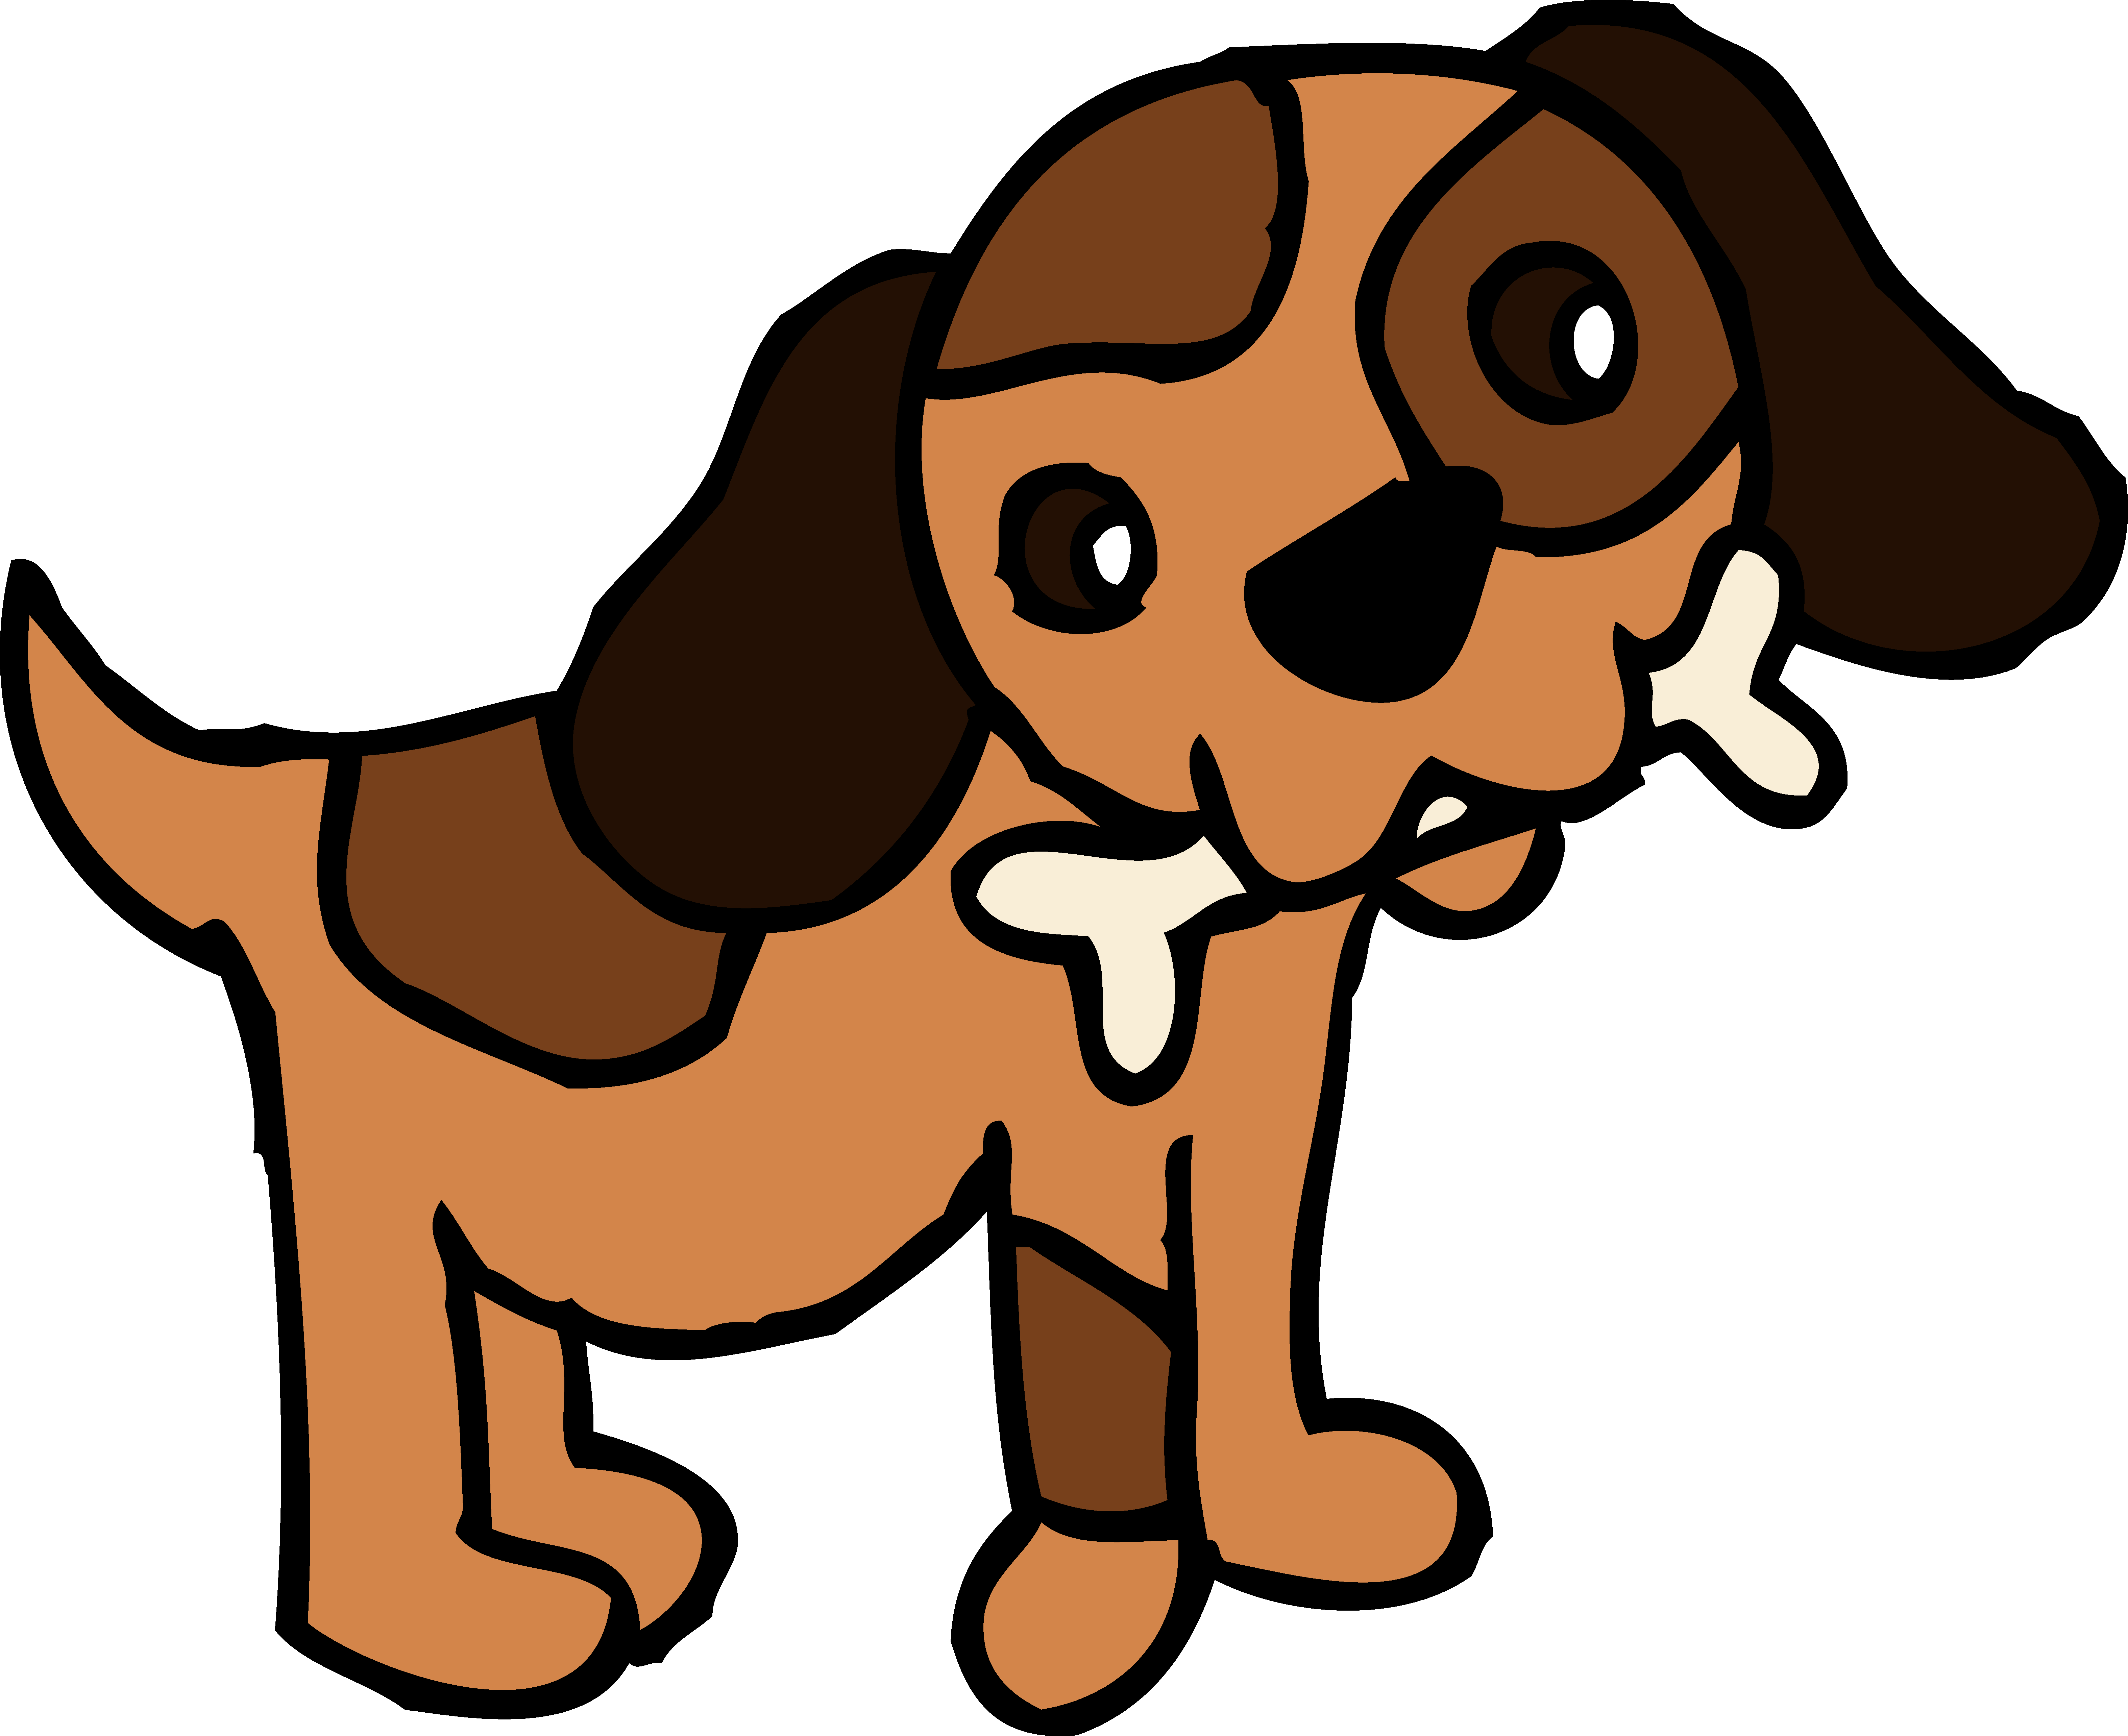 Free Cartoon Dog Transparent, Download Free Cartoon Dog Transparent png  images, Free ClipArts on Clipart Library